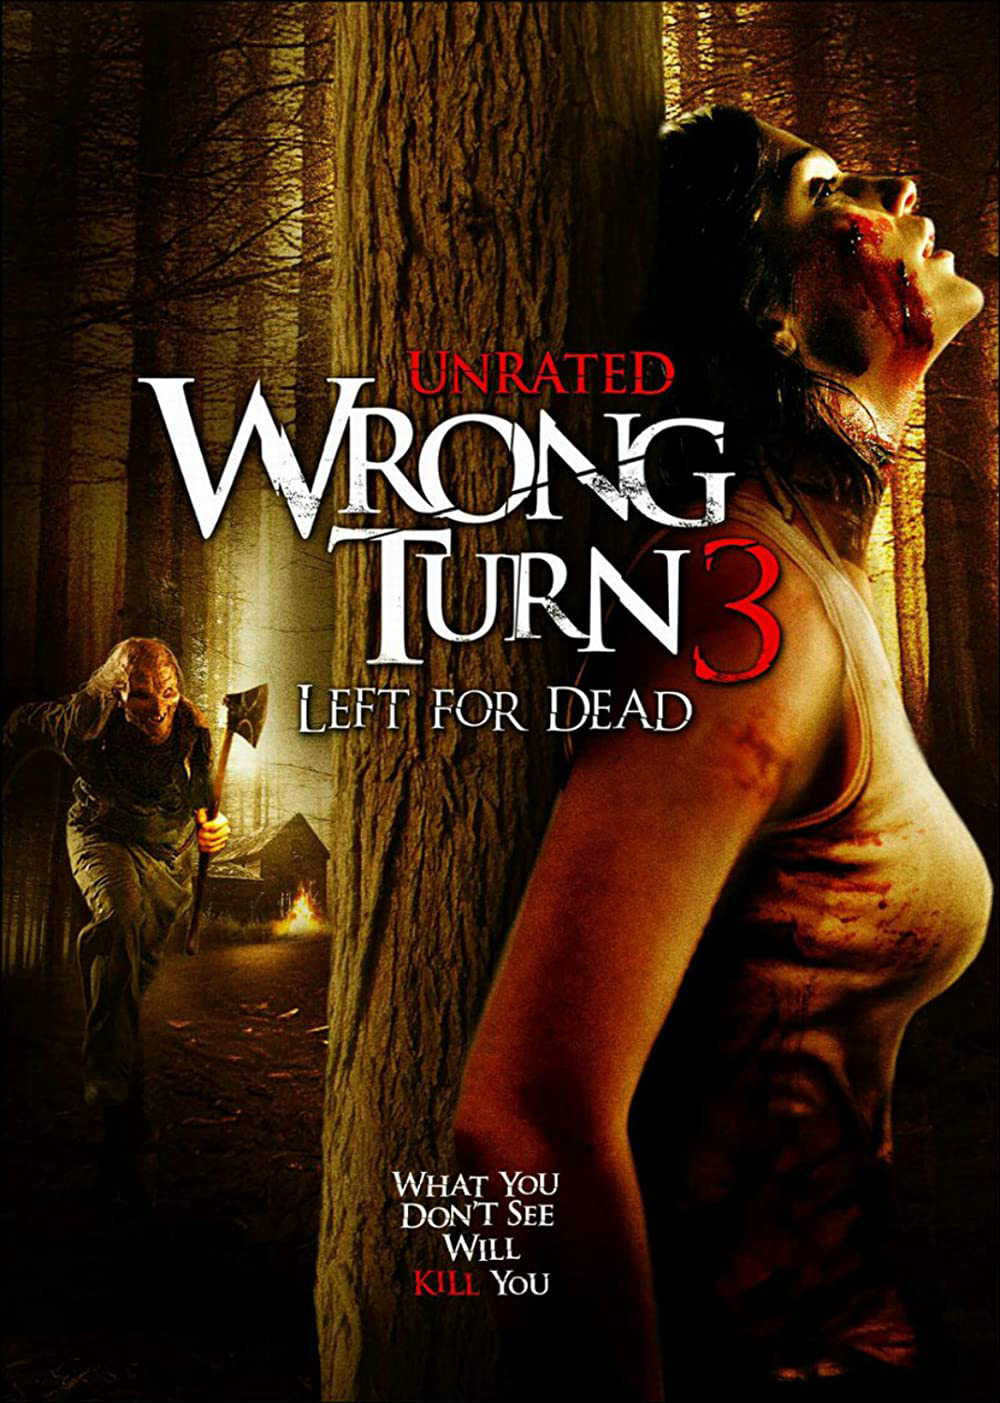 Ngã Rẽ Tử Thần 3 - Wrong Turn 3: Left for Dead